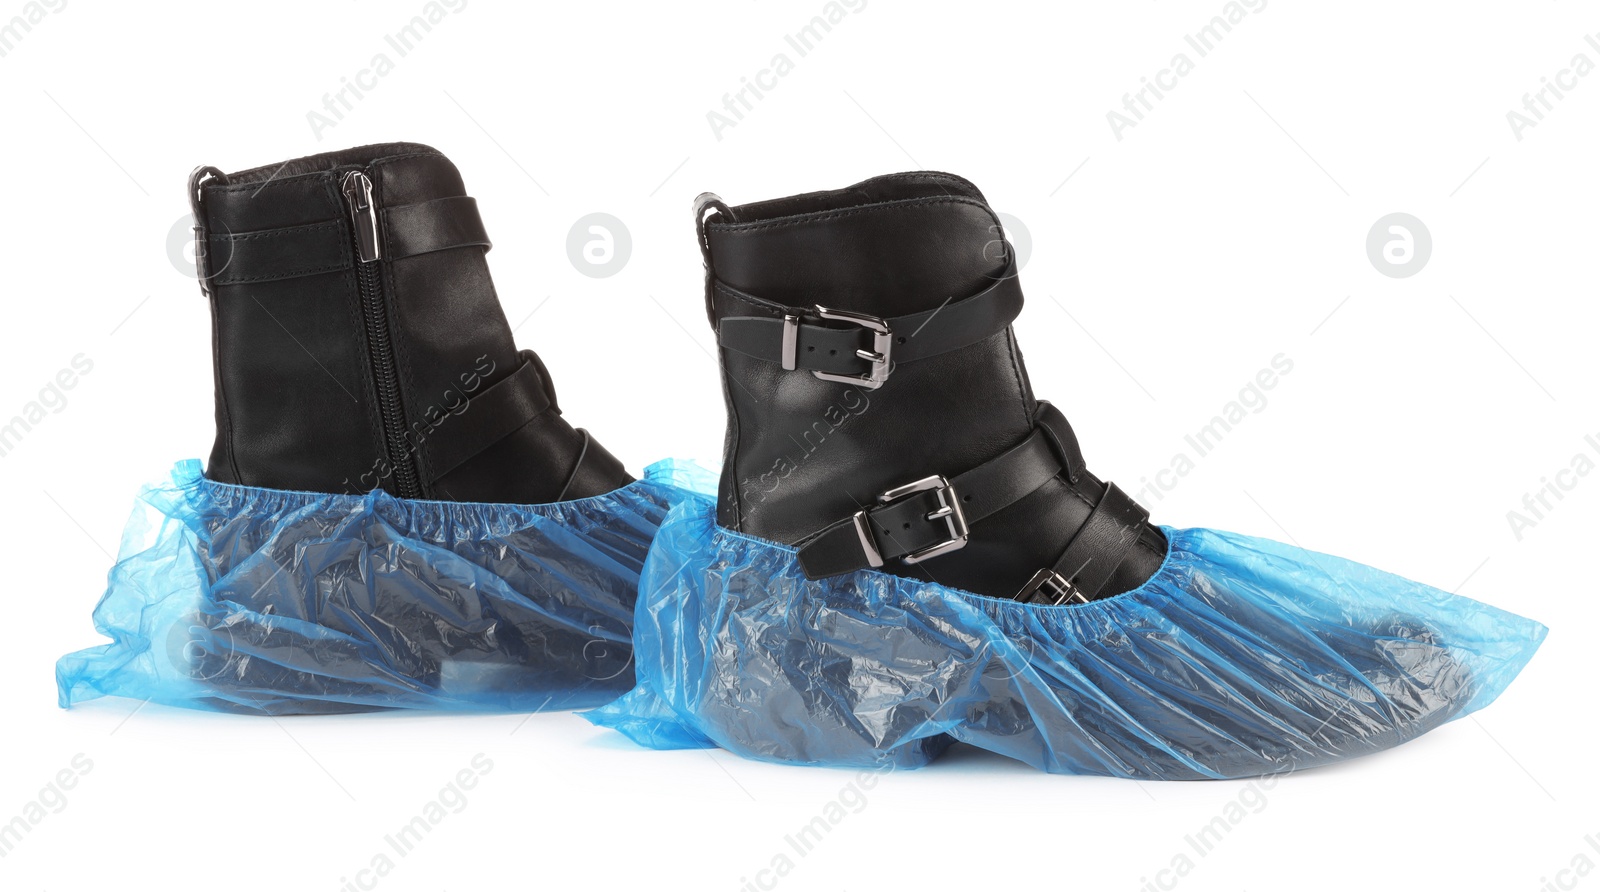 Photo of Women's boots in blue shoe covers isolated on white